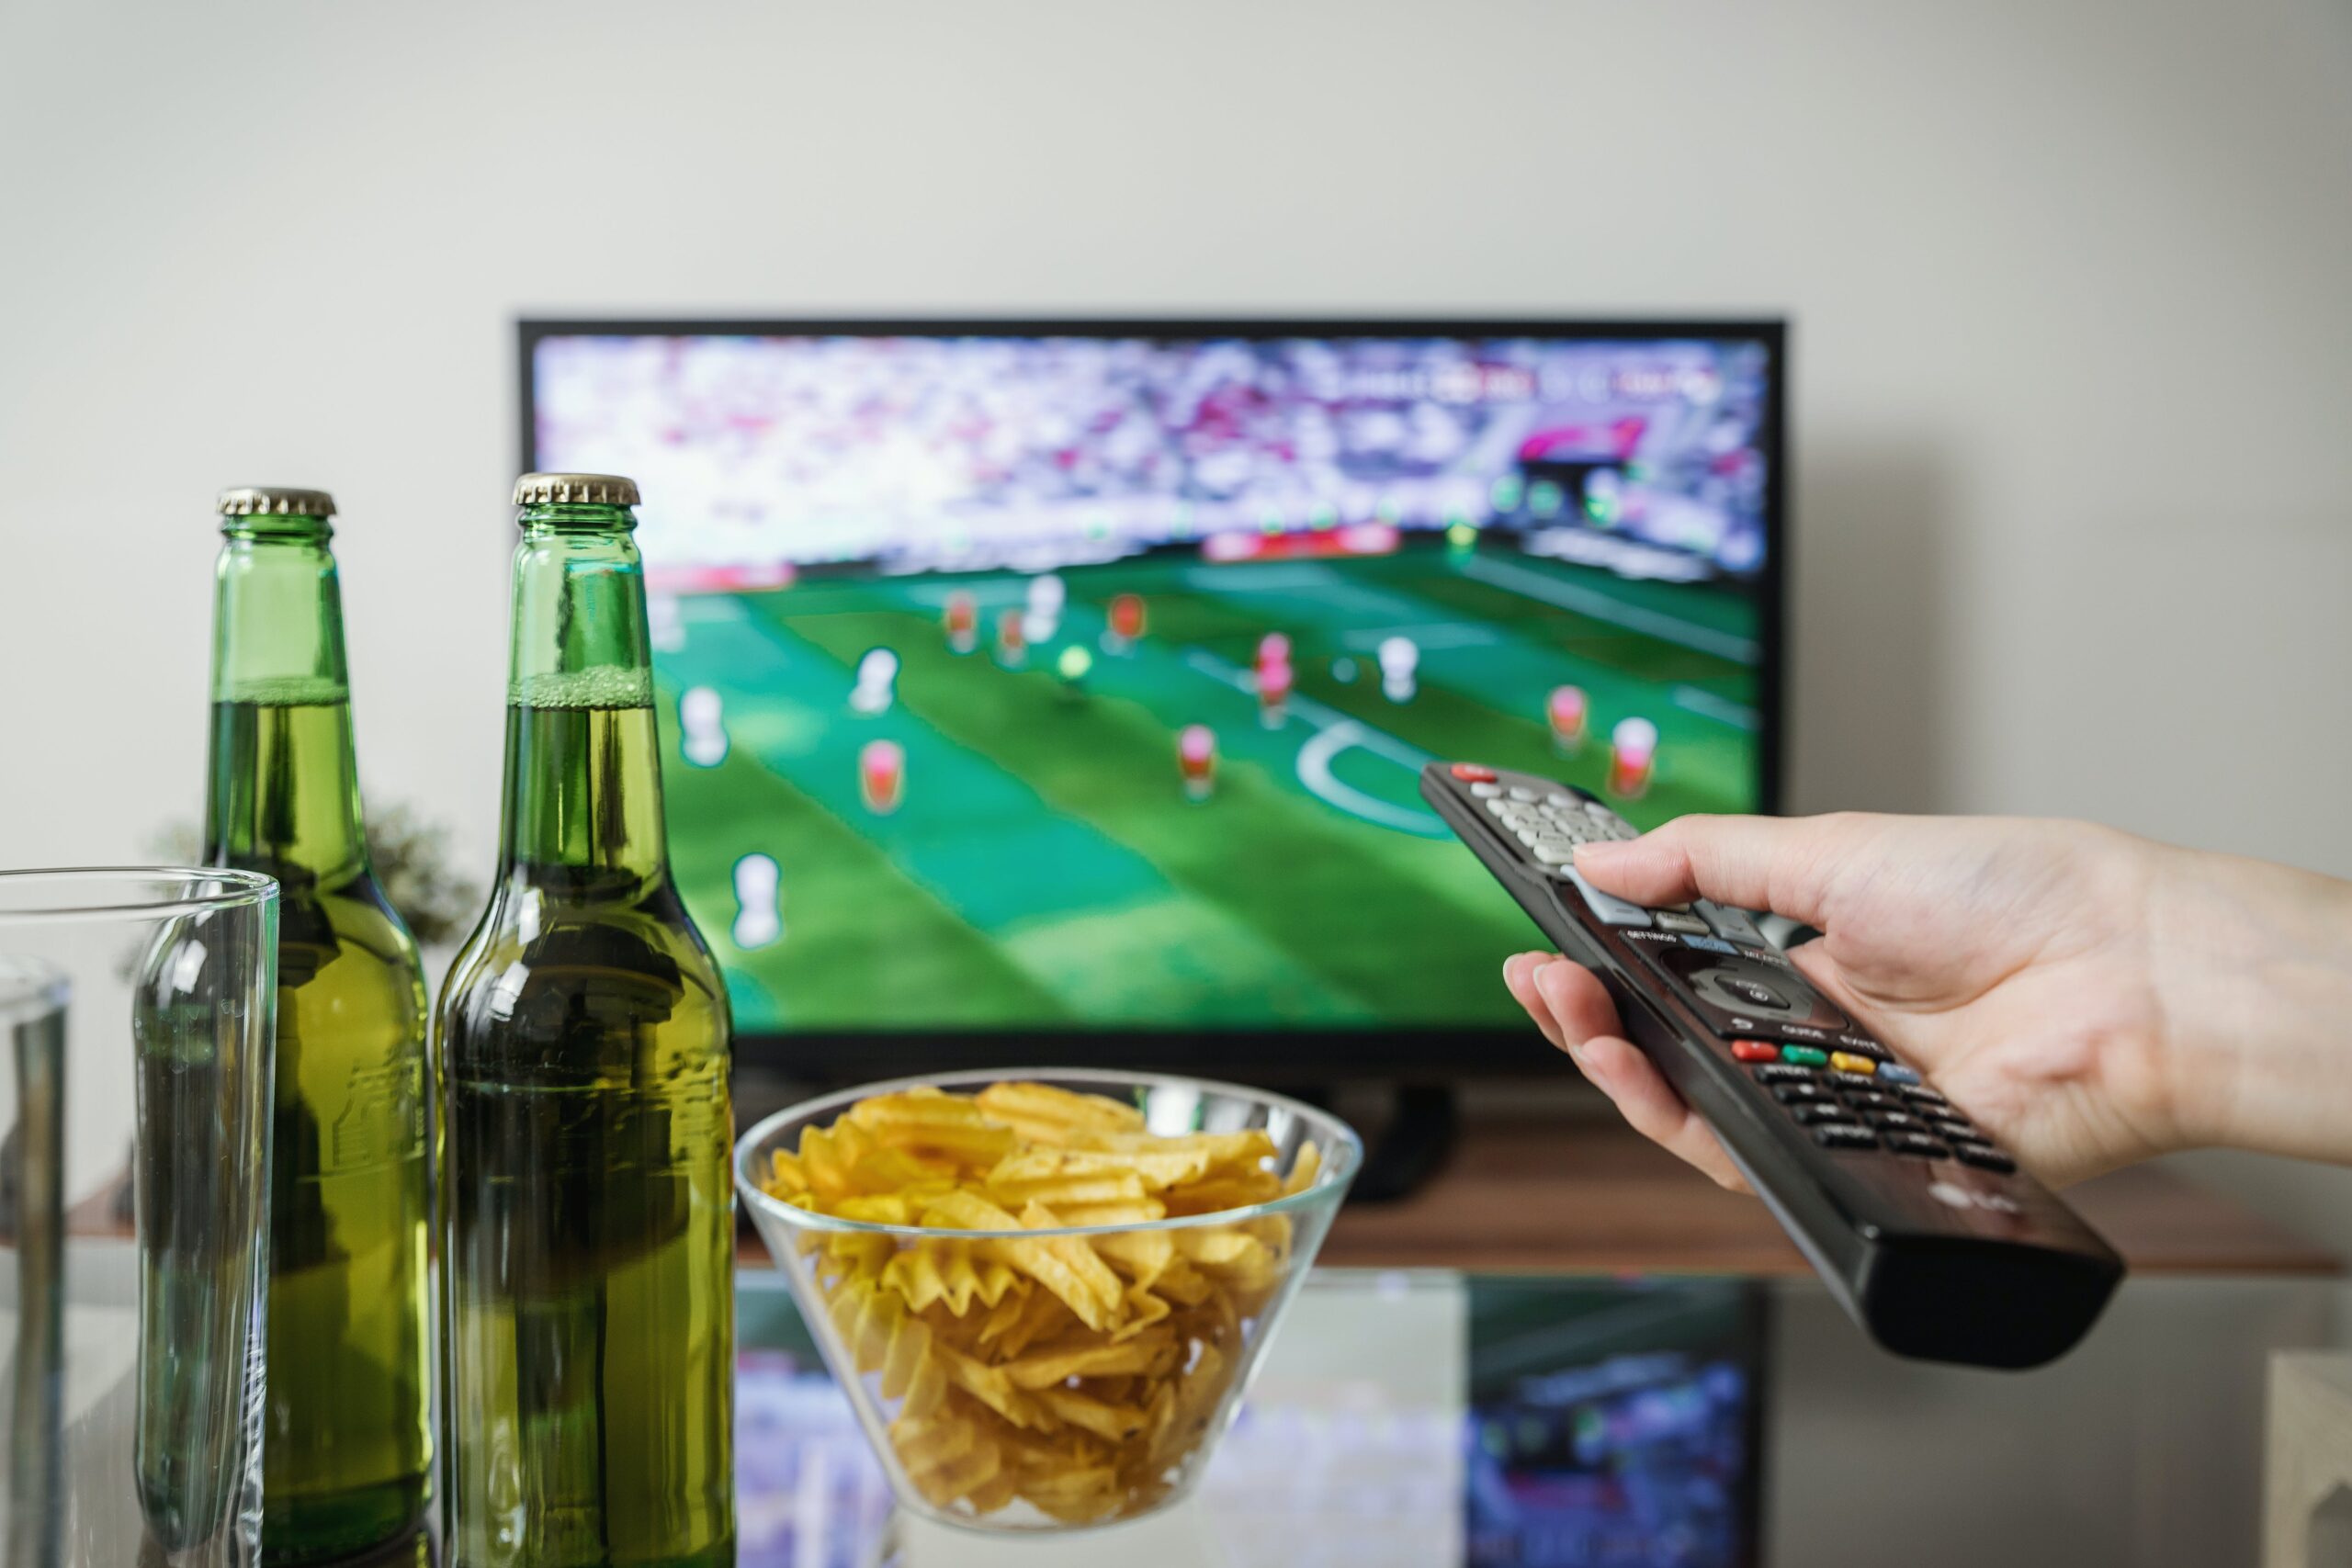 A person's hand holding a remote control, with beer bottles and a bowl of chips in front of a TV showing a football game and online betting odds.